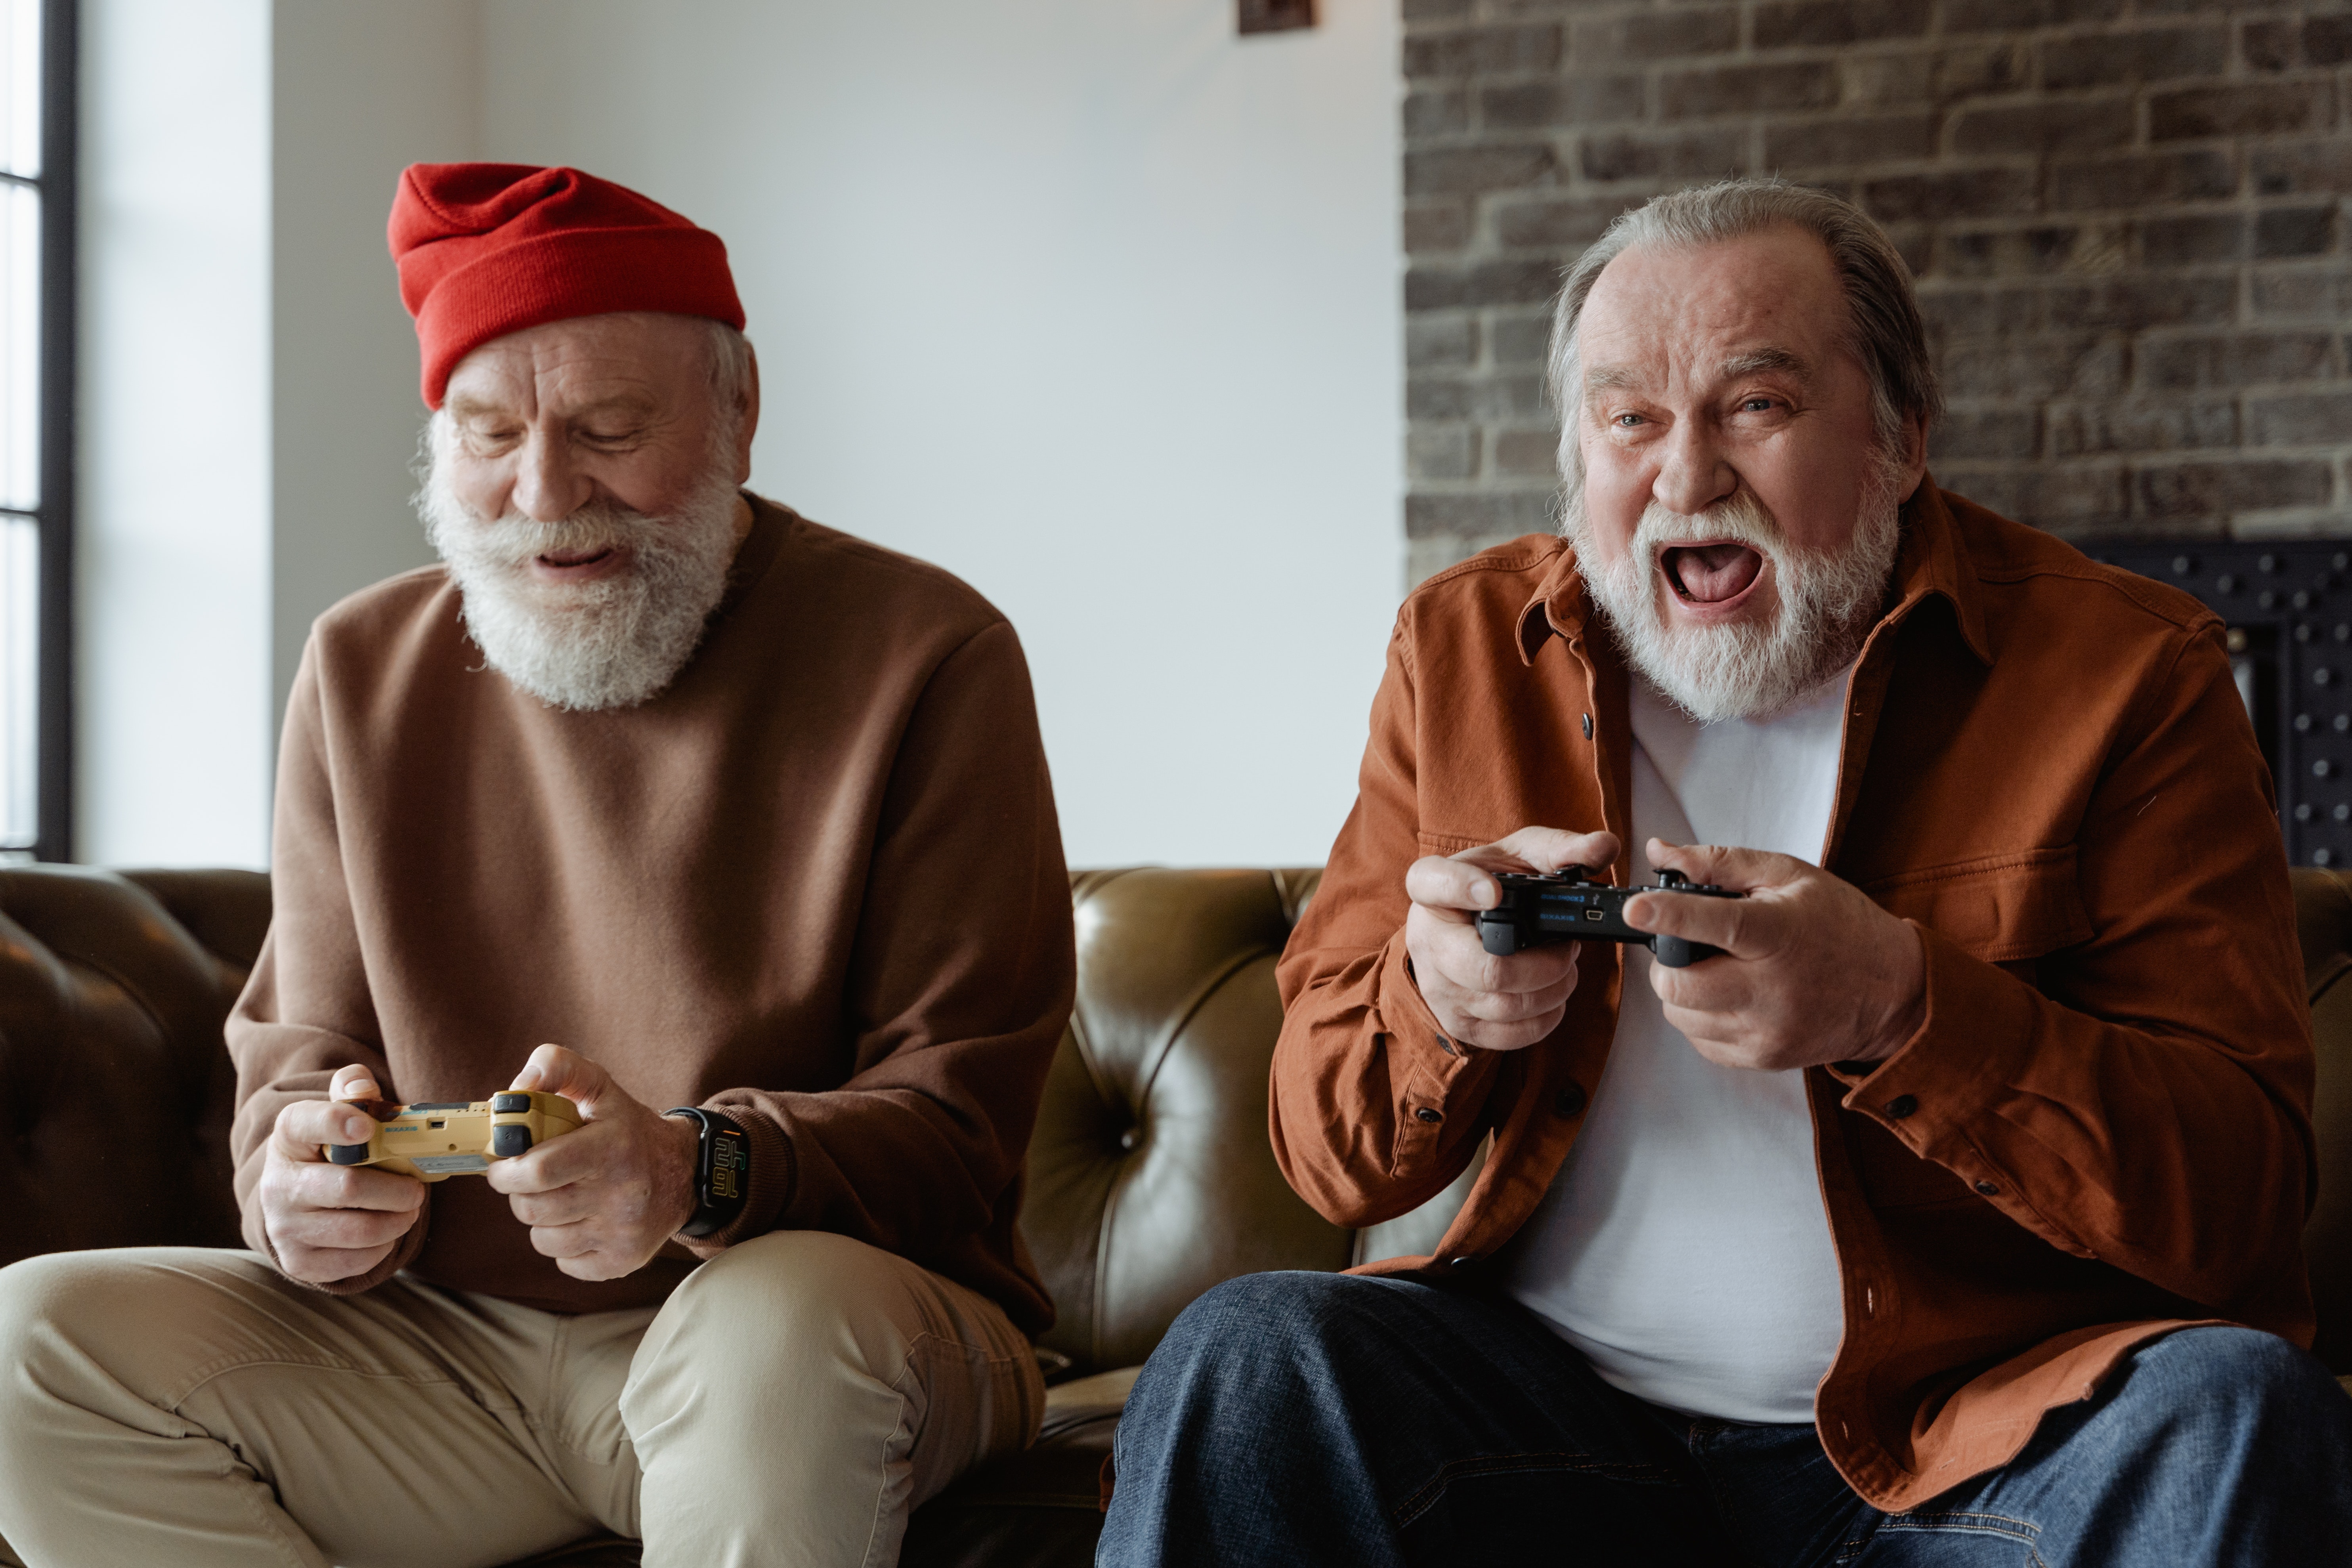 Two men playing video games together